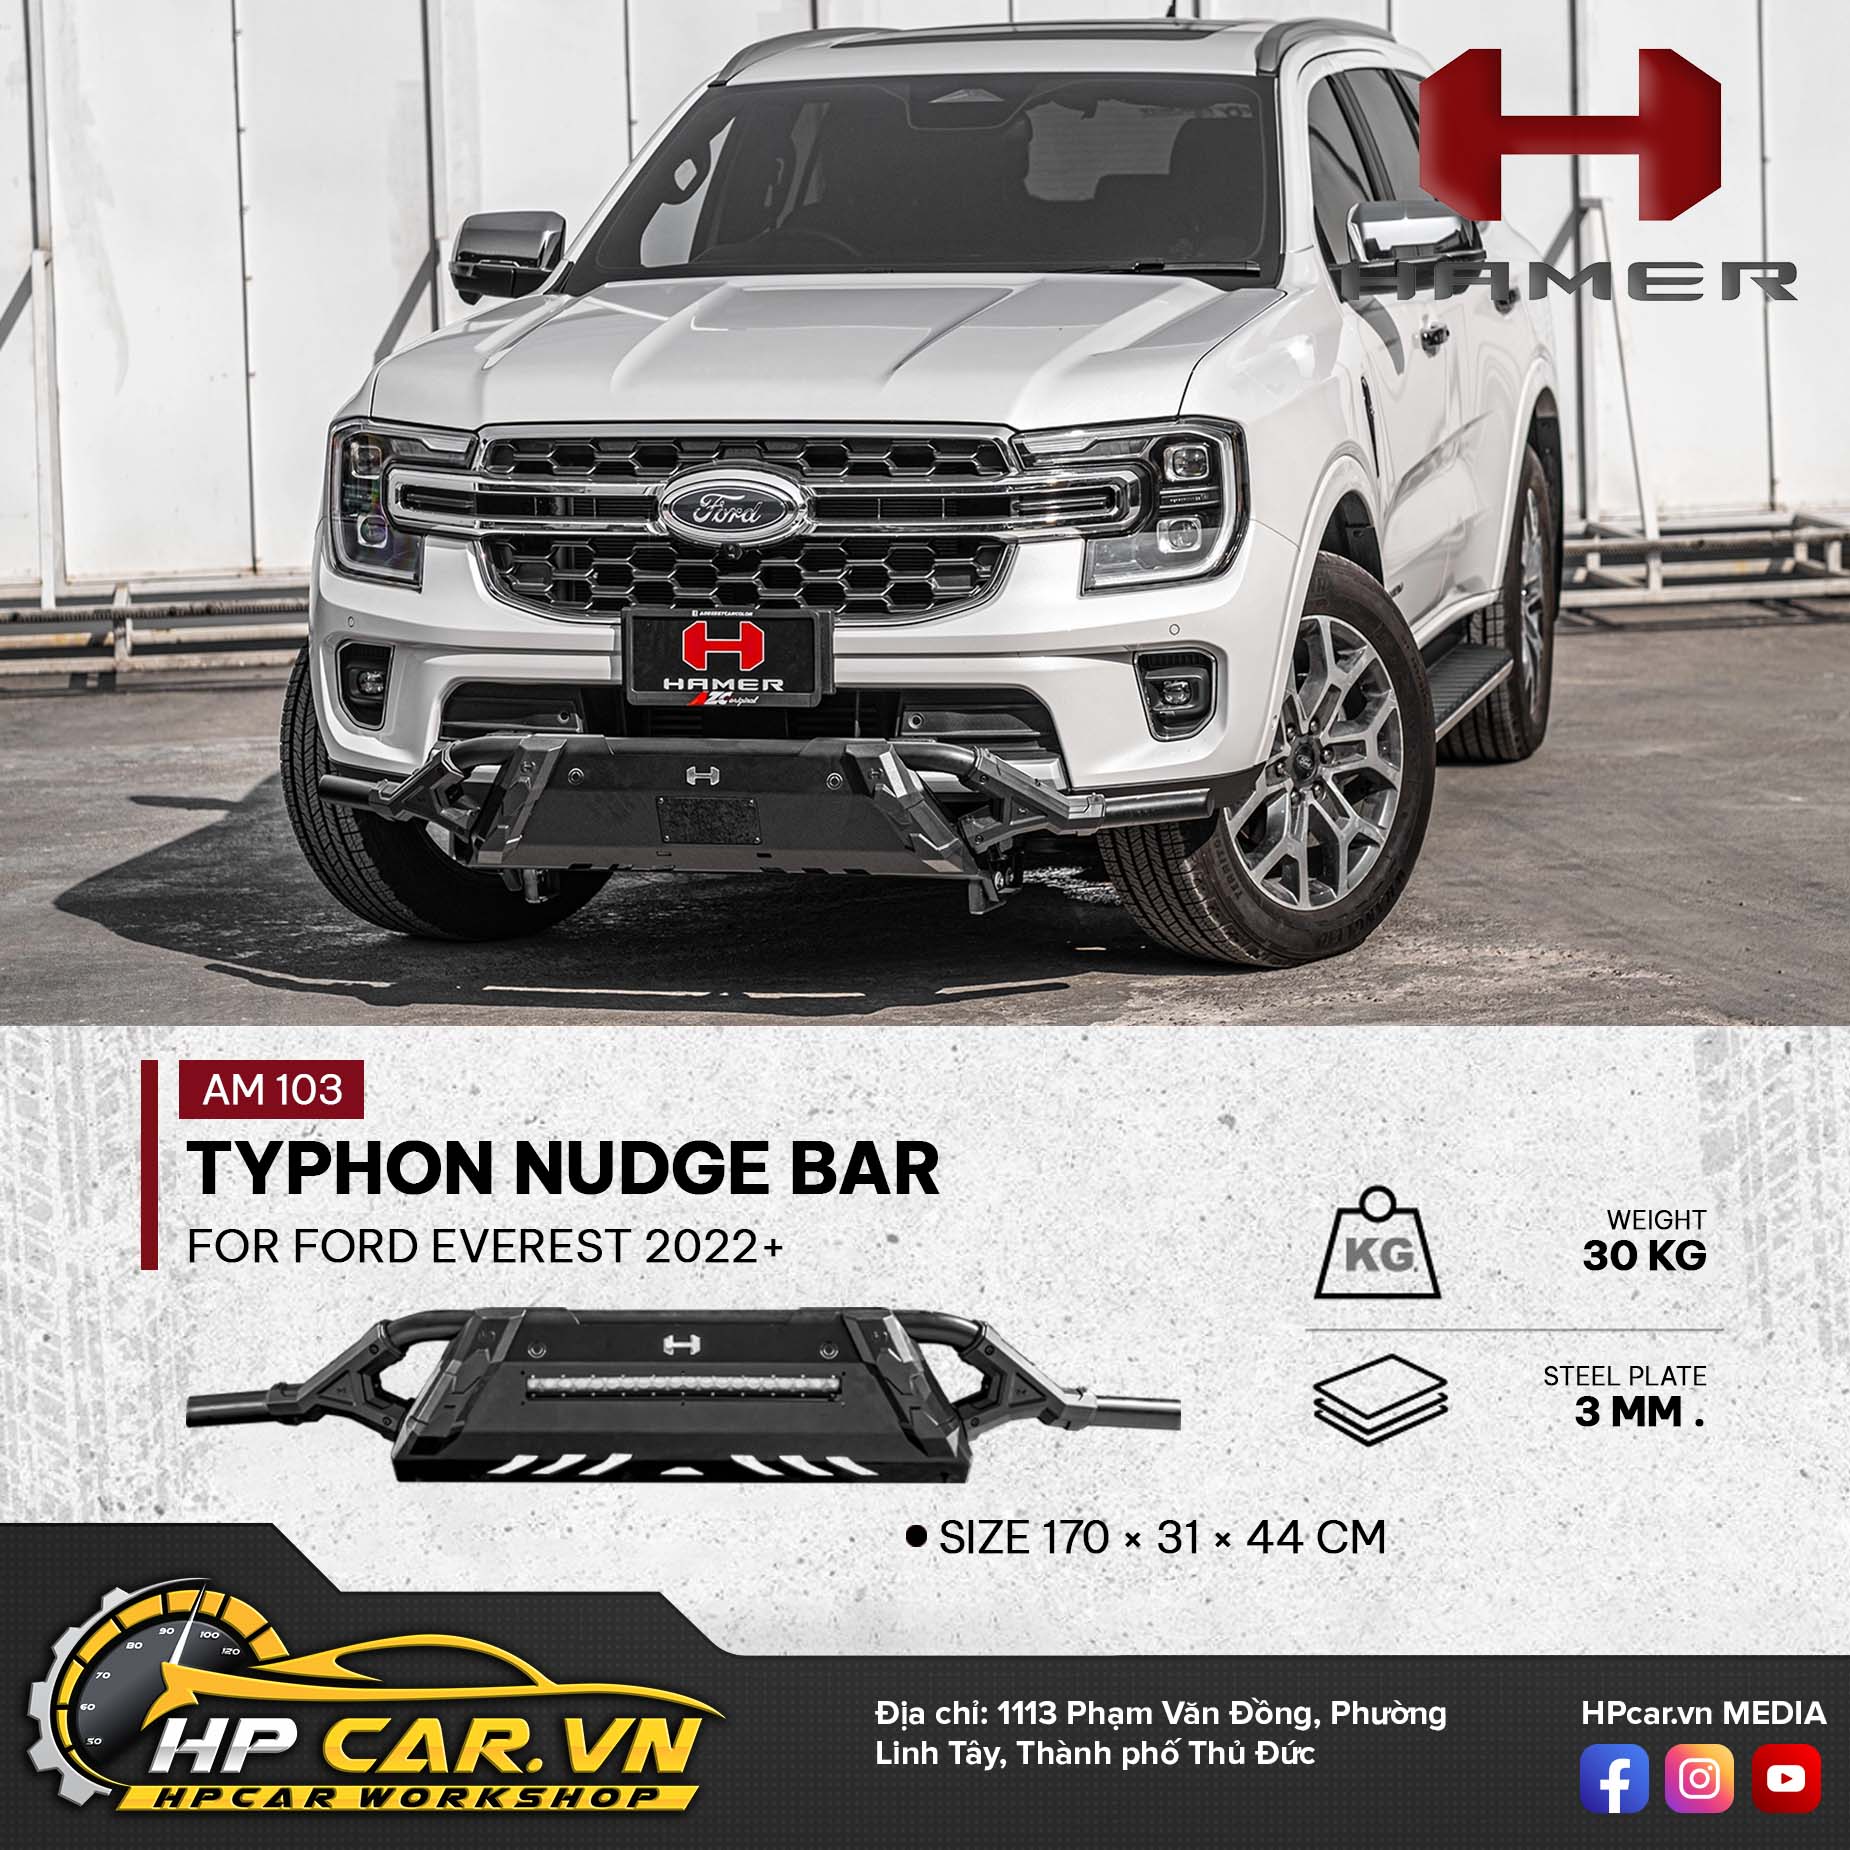 TYPHON NUDGE BAR FOR FORD EVEREST 2022+